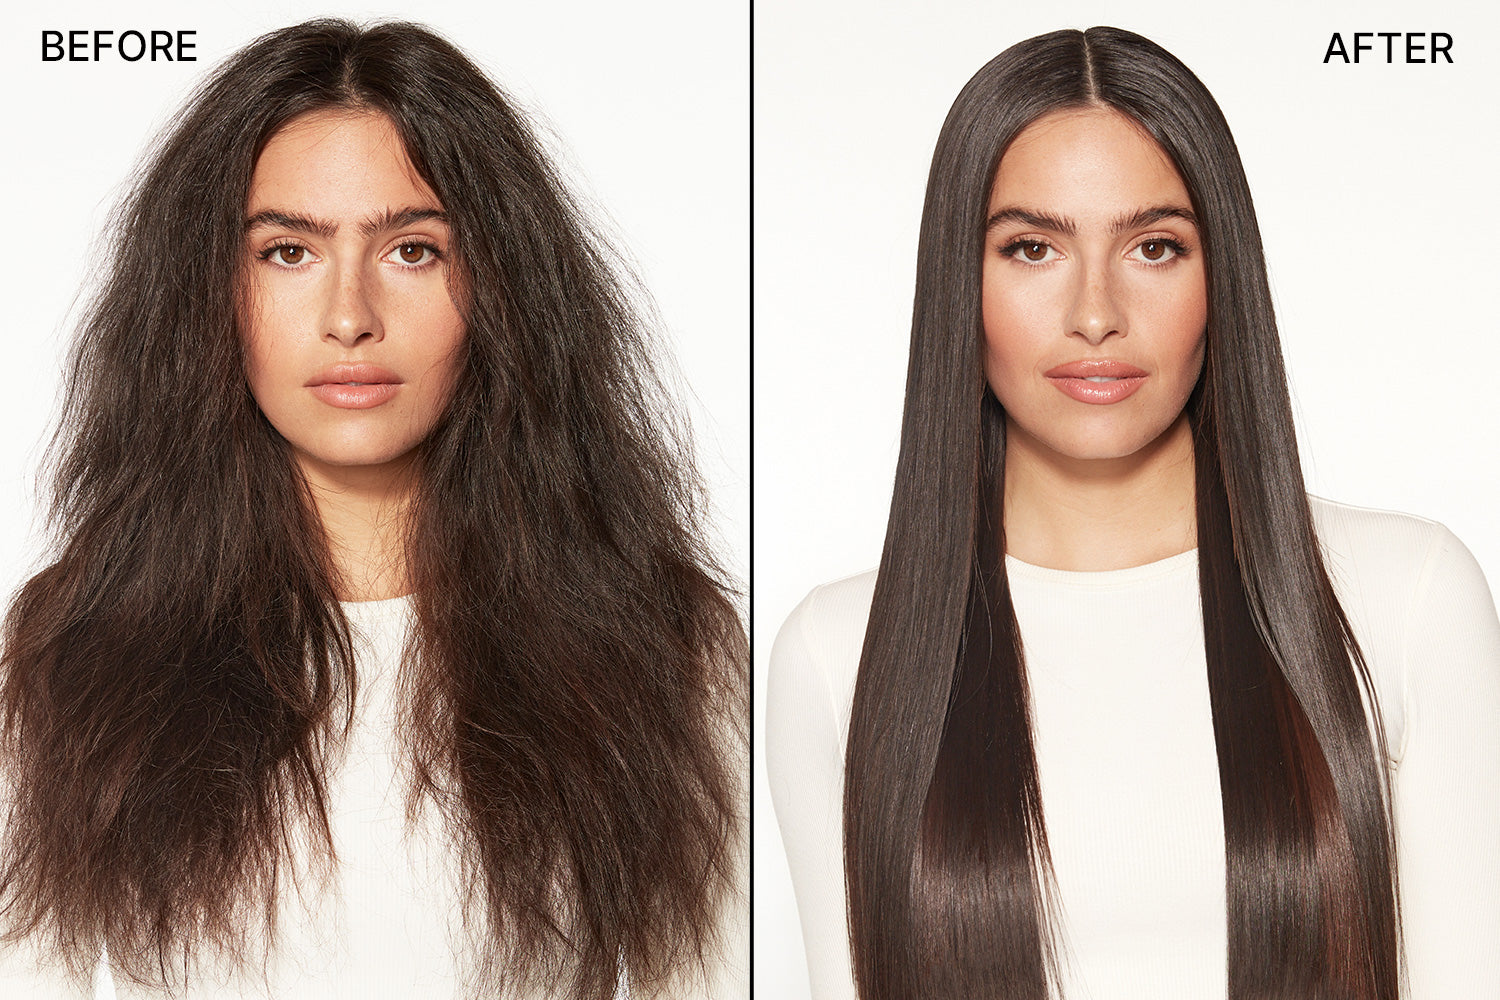 Before & after of a model with long frizzy hair and then straight, smooth hair.